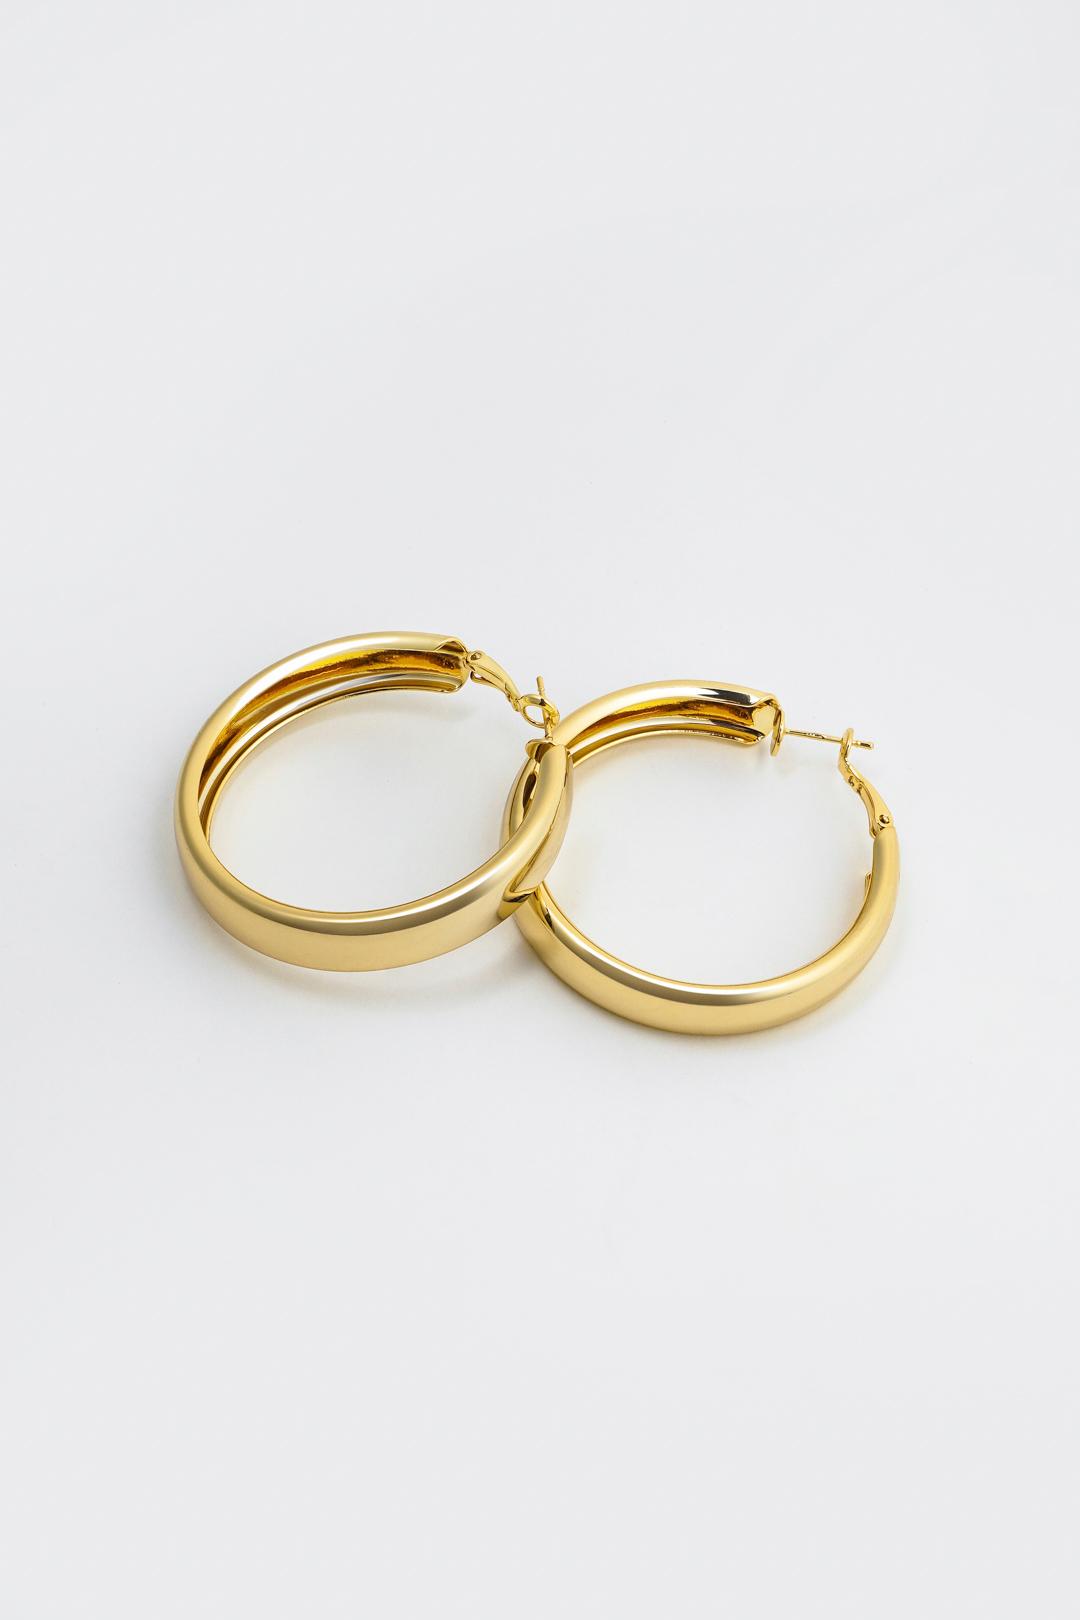 The Large Ravello Hoops